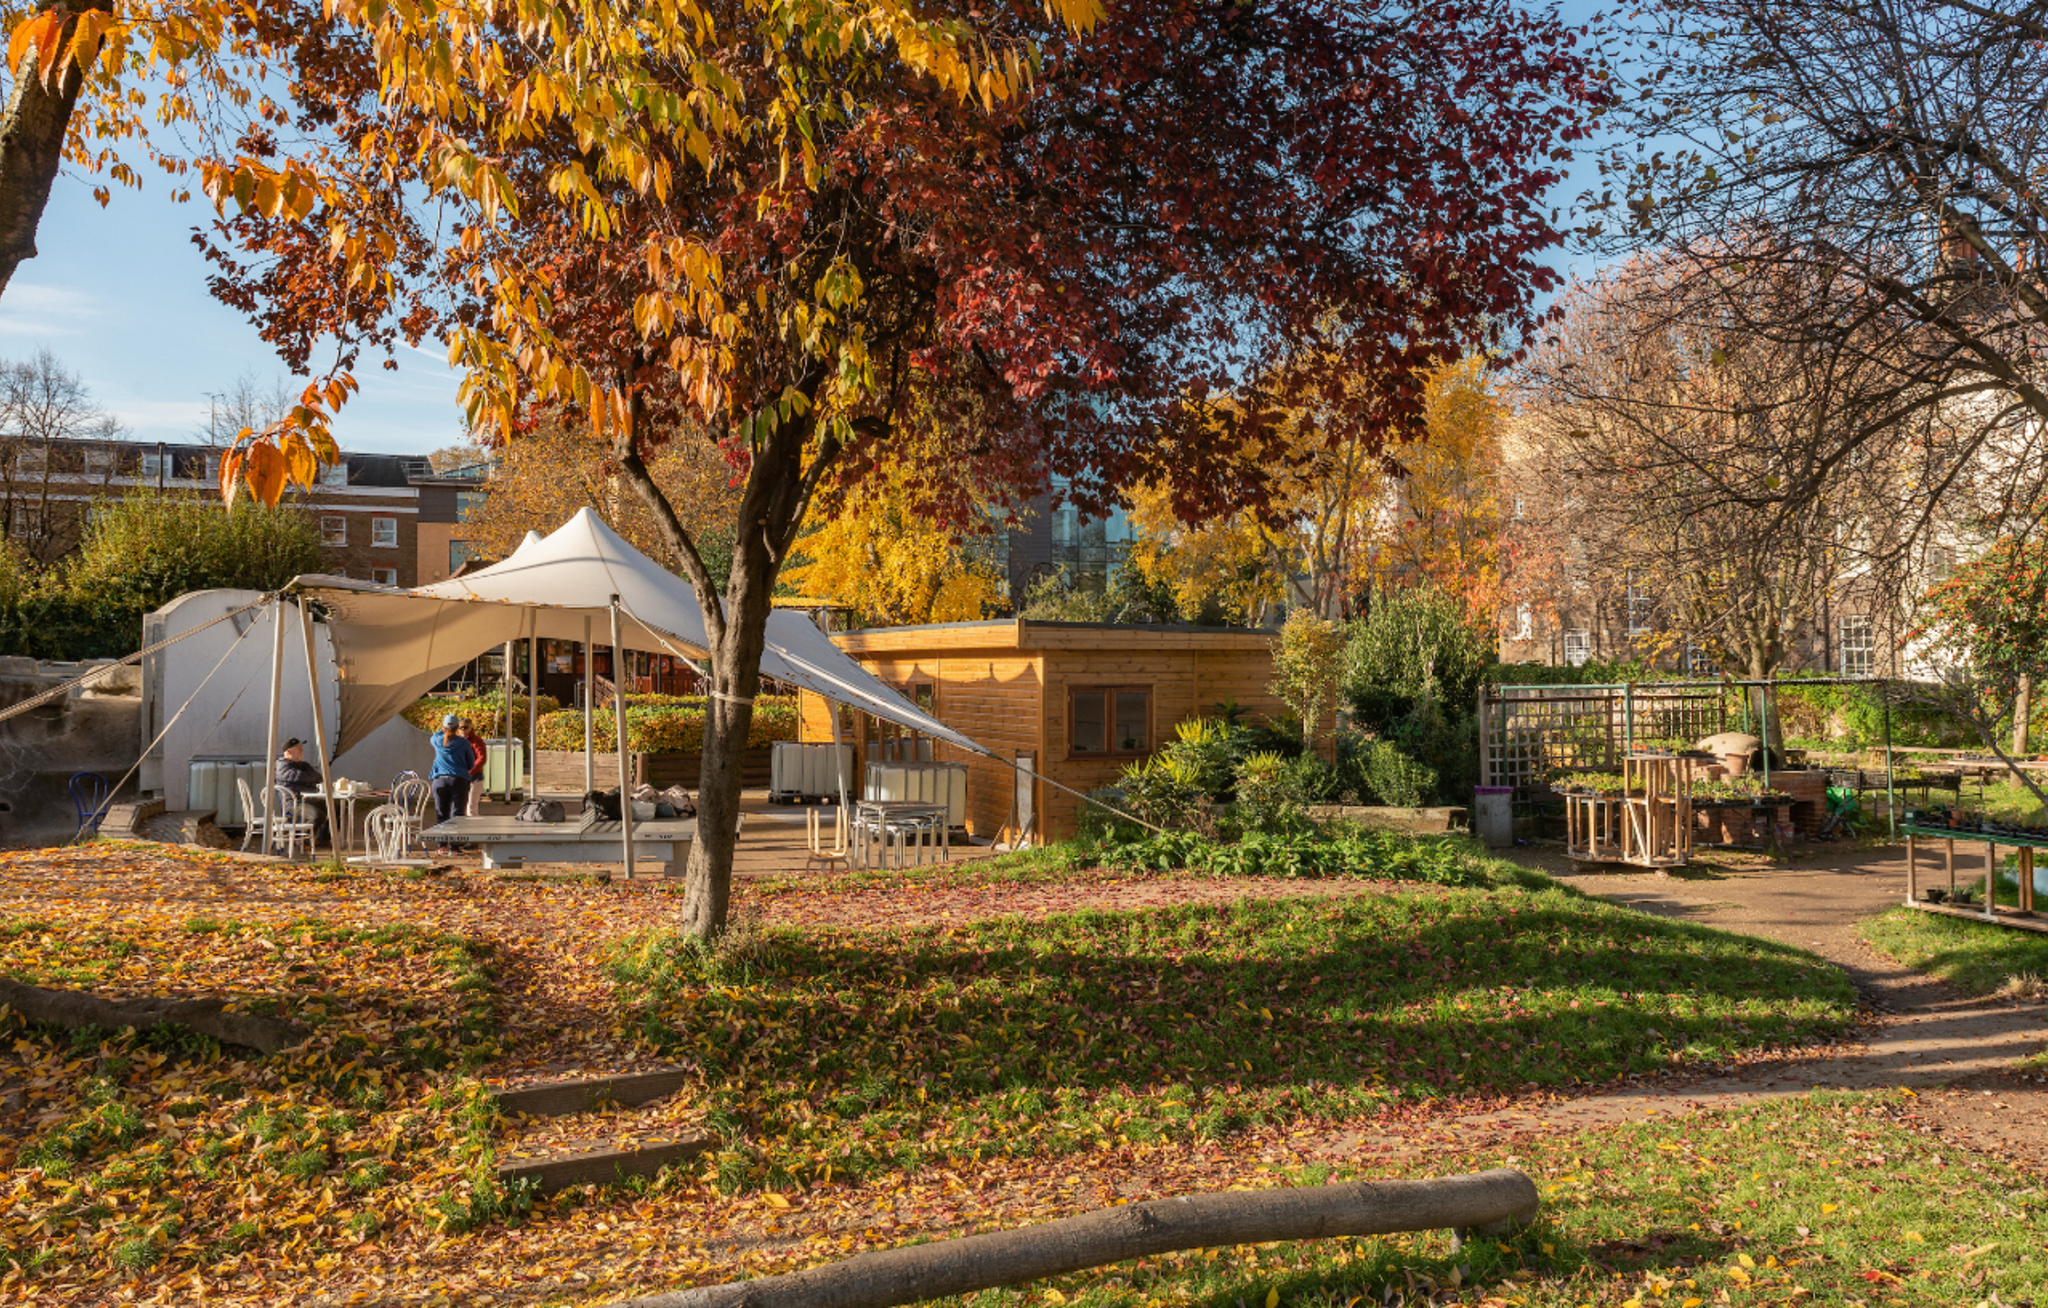 Open gazebo-like structure in small park, autumnal colours